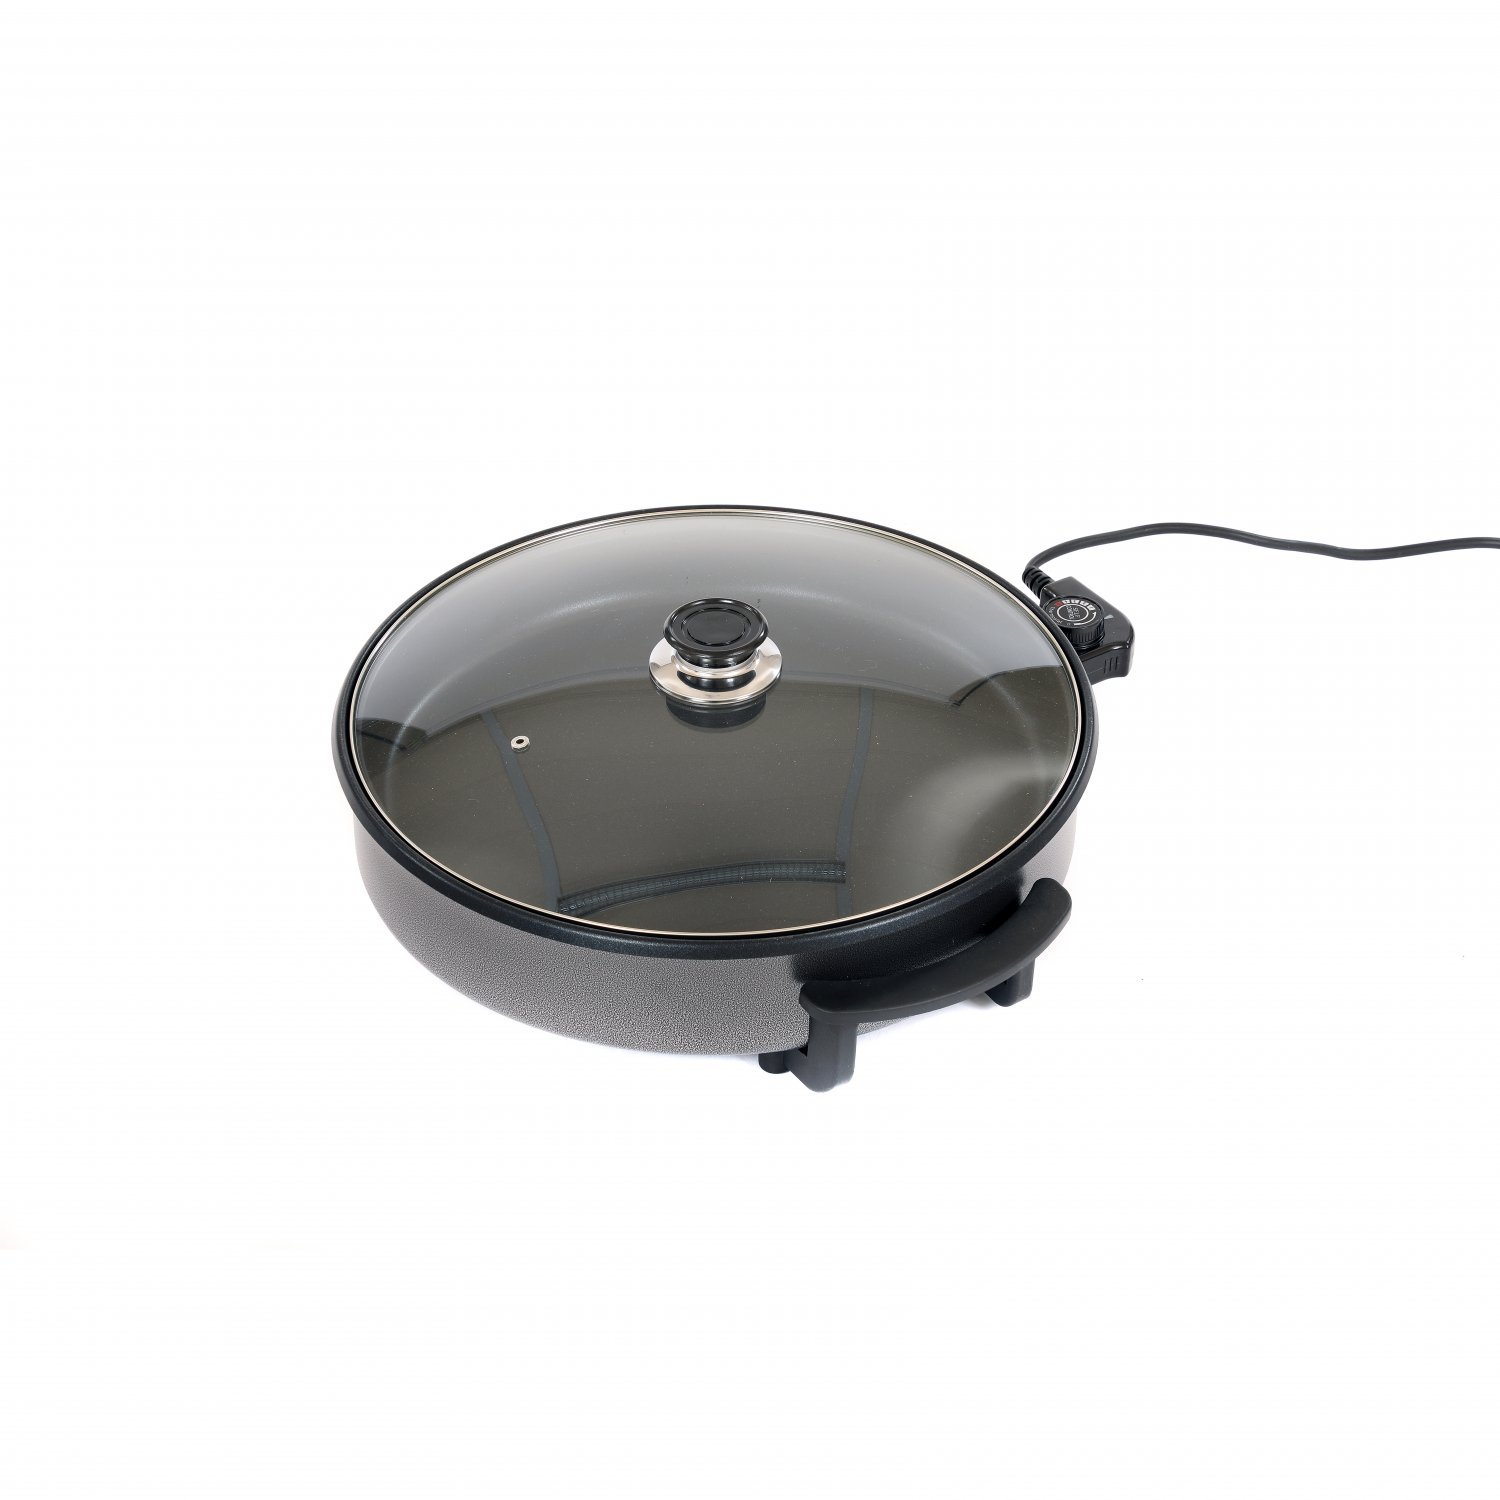 Multi-Functio Electric Frying Pan with Glass Lid DZSF Large Multi Cooker 1500W 42cm Non-Stick Surface and Cool Touch Handles 